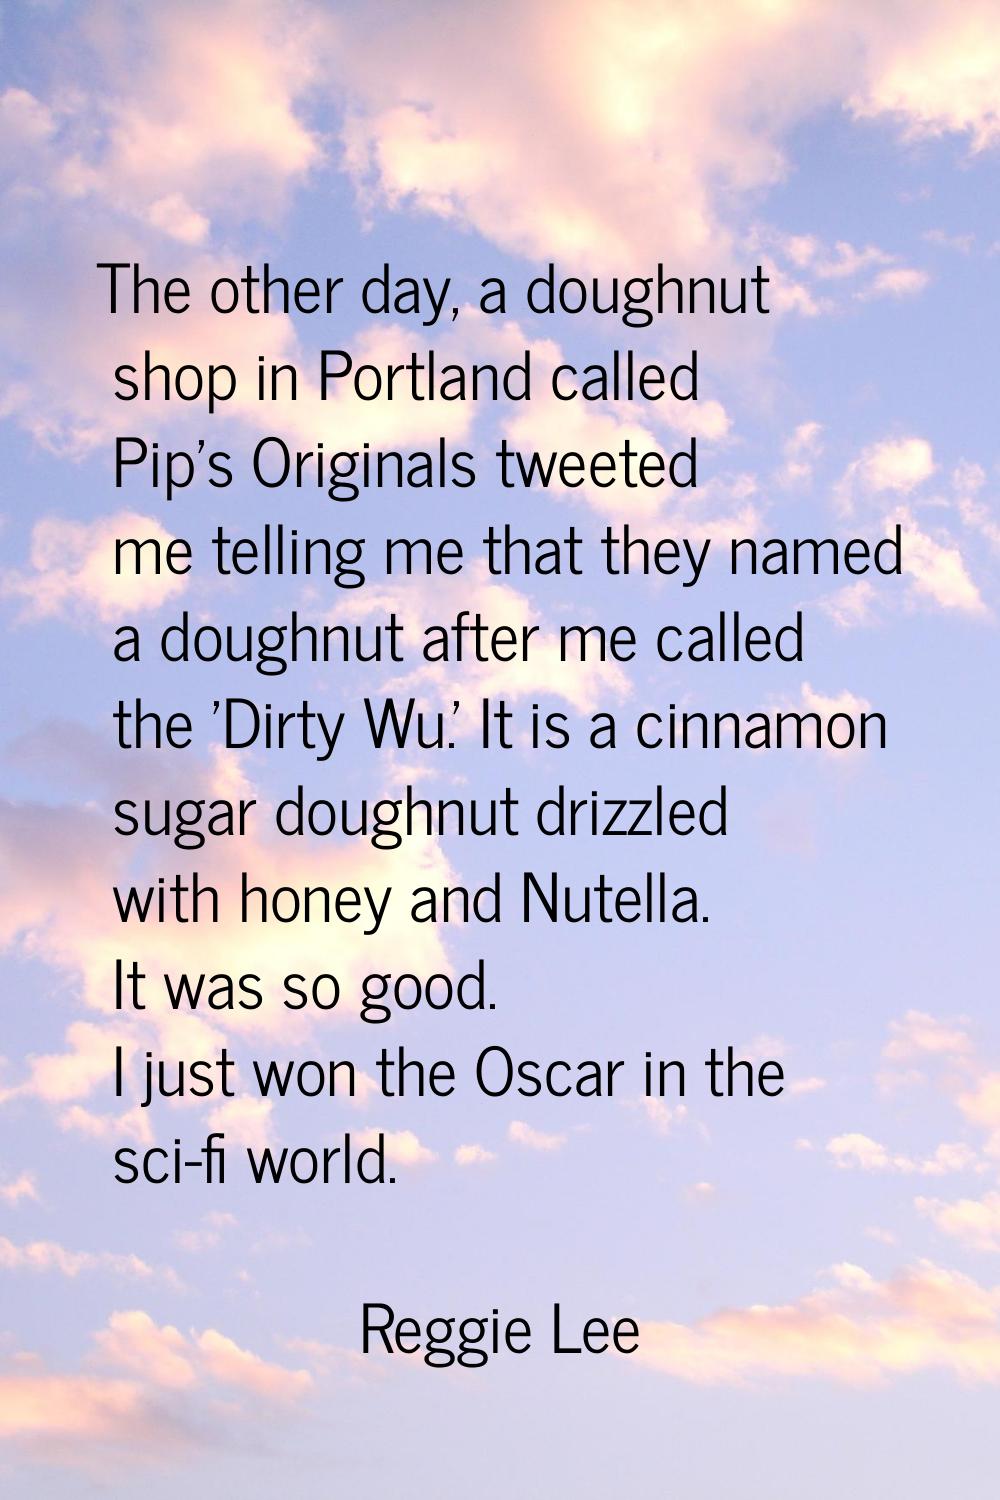 The other day, a doughnut shop in Portland called Pip's Originals tweeted me telling me that they n